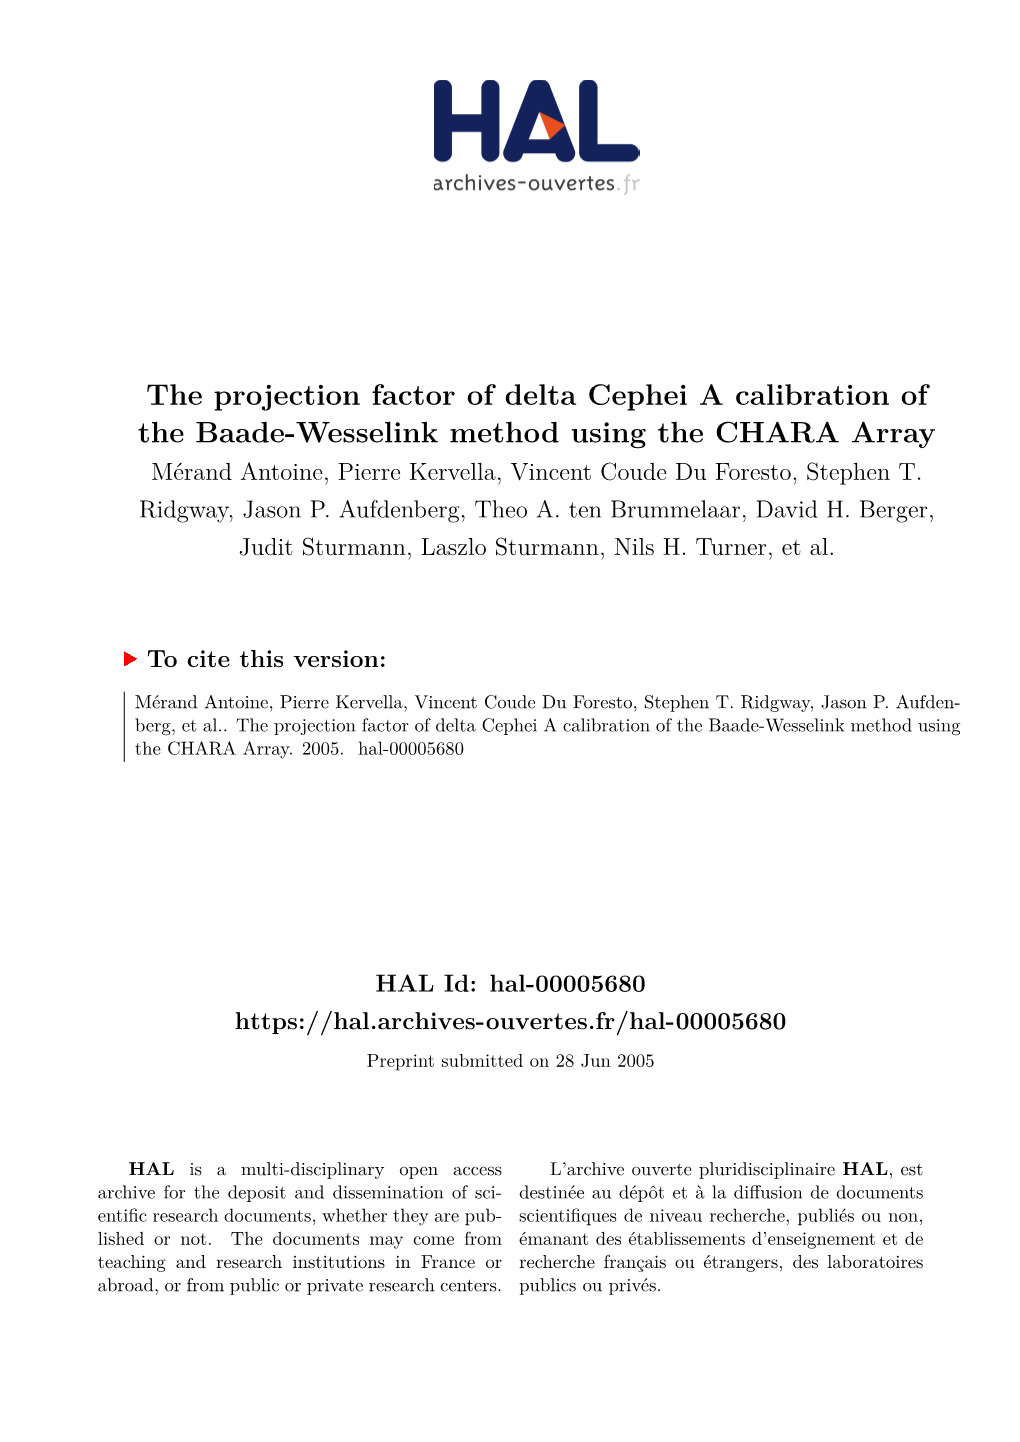 The Projection Factor of Delta Cephei a Calibration of the Baade-Wesselink